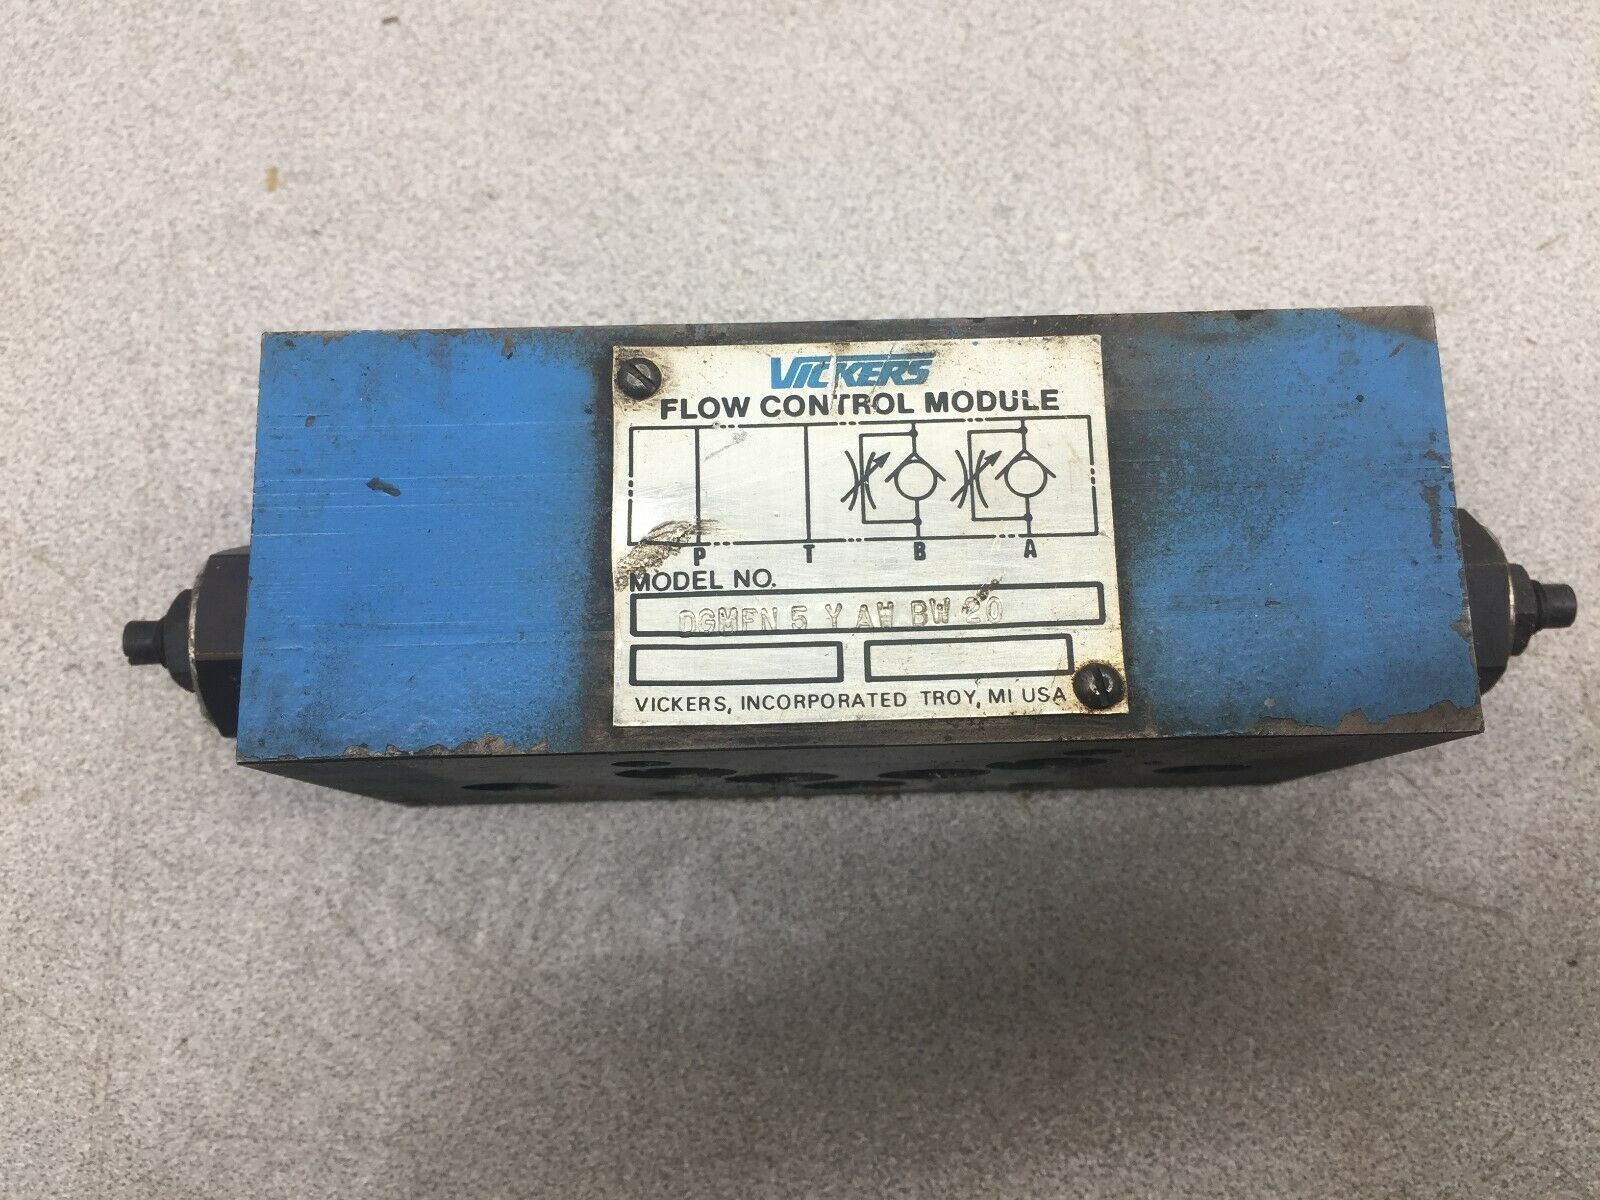 USED VICKERS FLOW CONTROL MODULE DGMFN-5-Y-AW-BW-20